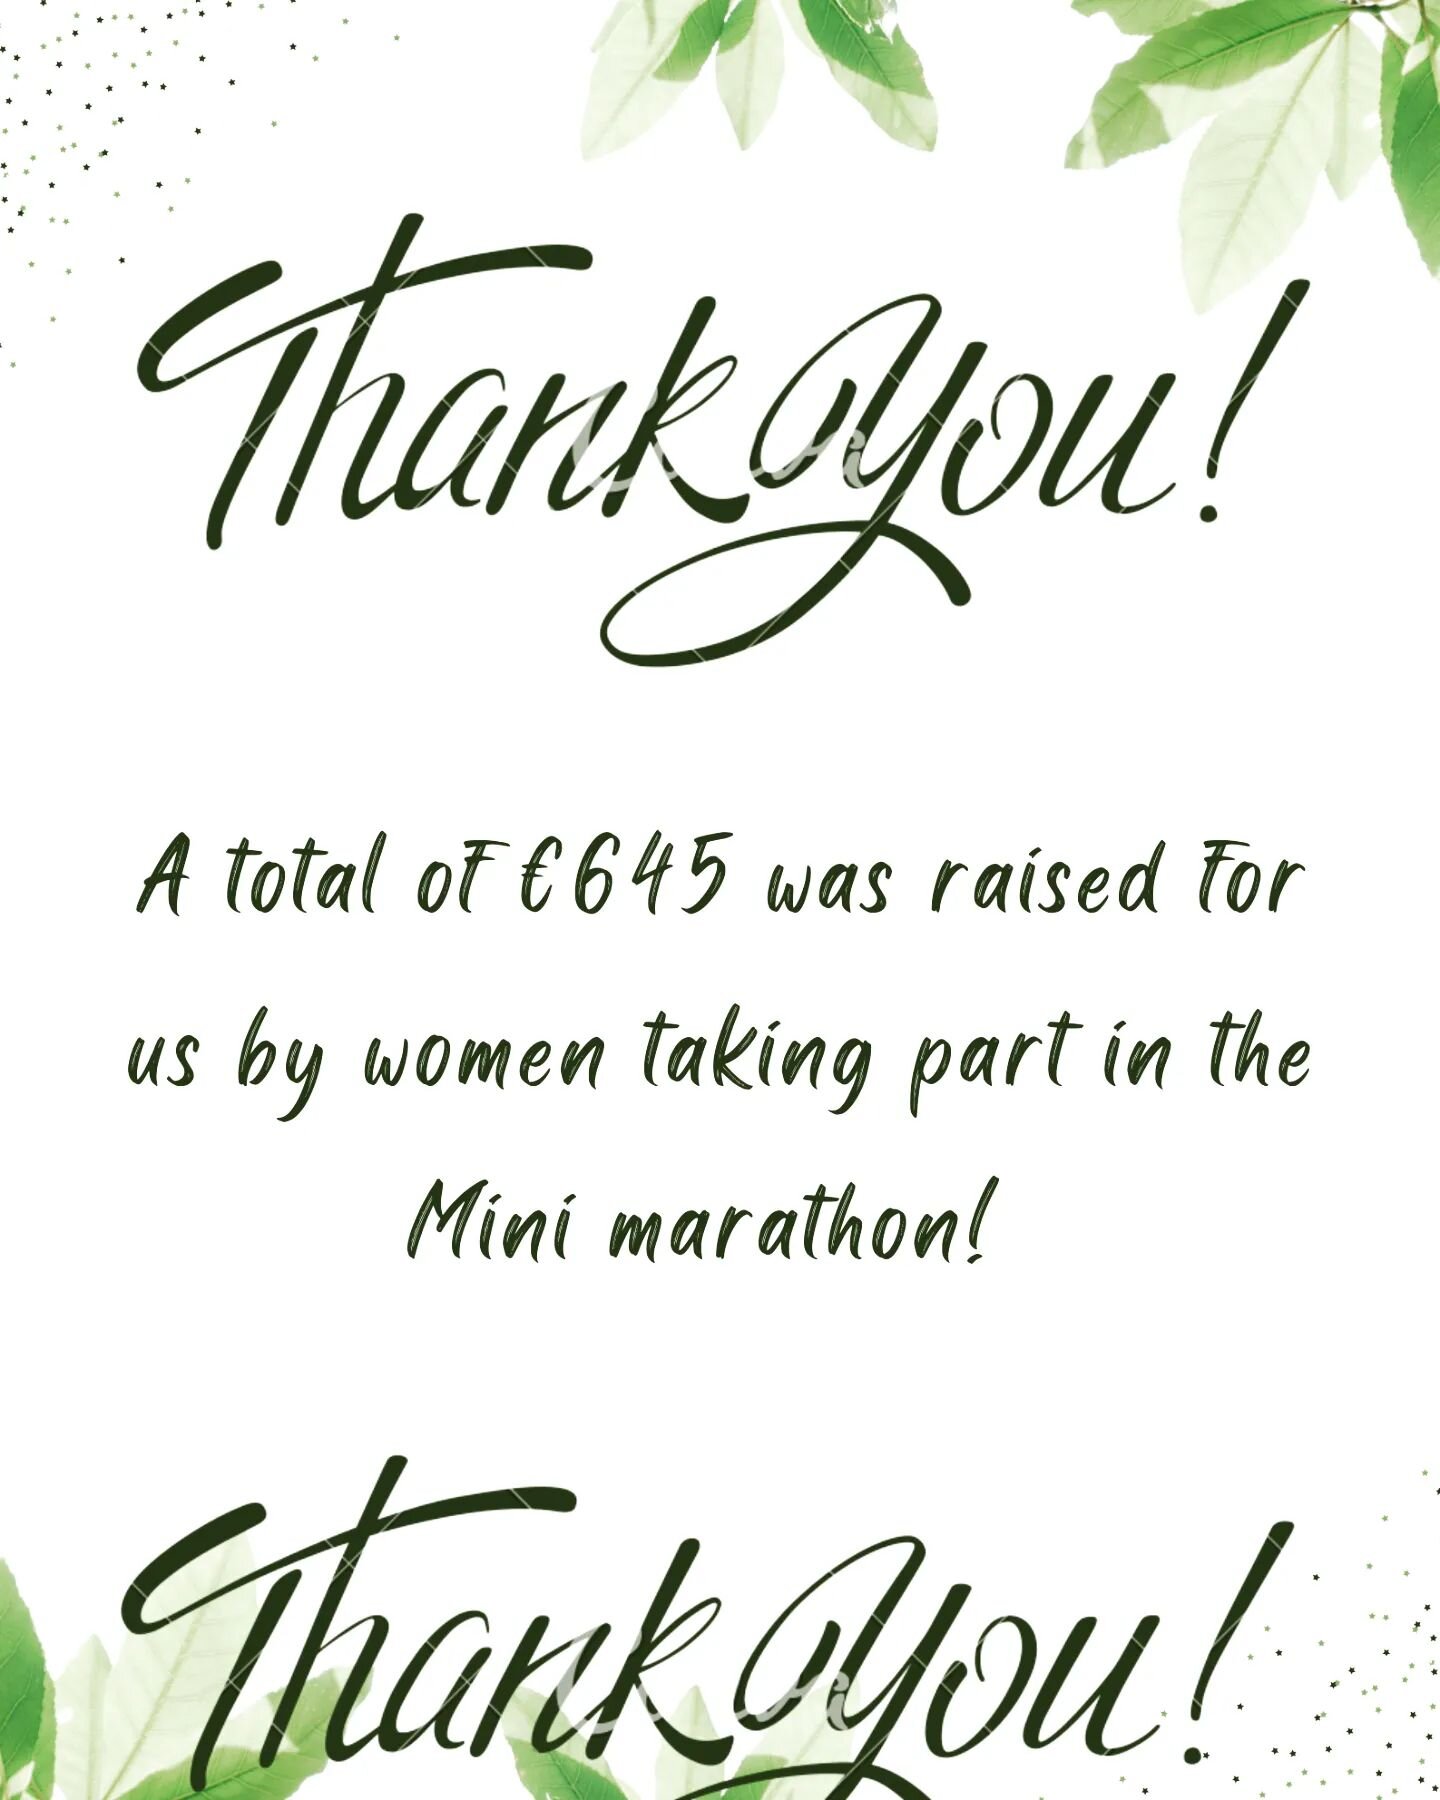 A massive thank you to everyone who took part in the Mini Marathon and raised money for us. 

Thanks to you all, you raised an amazing &euro;645!

We are so very appreciative to you all!

We are a small charity, so every little helps!

#ectopic #ecto